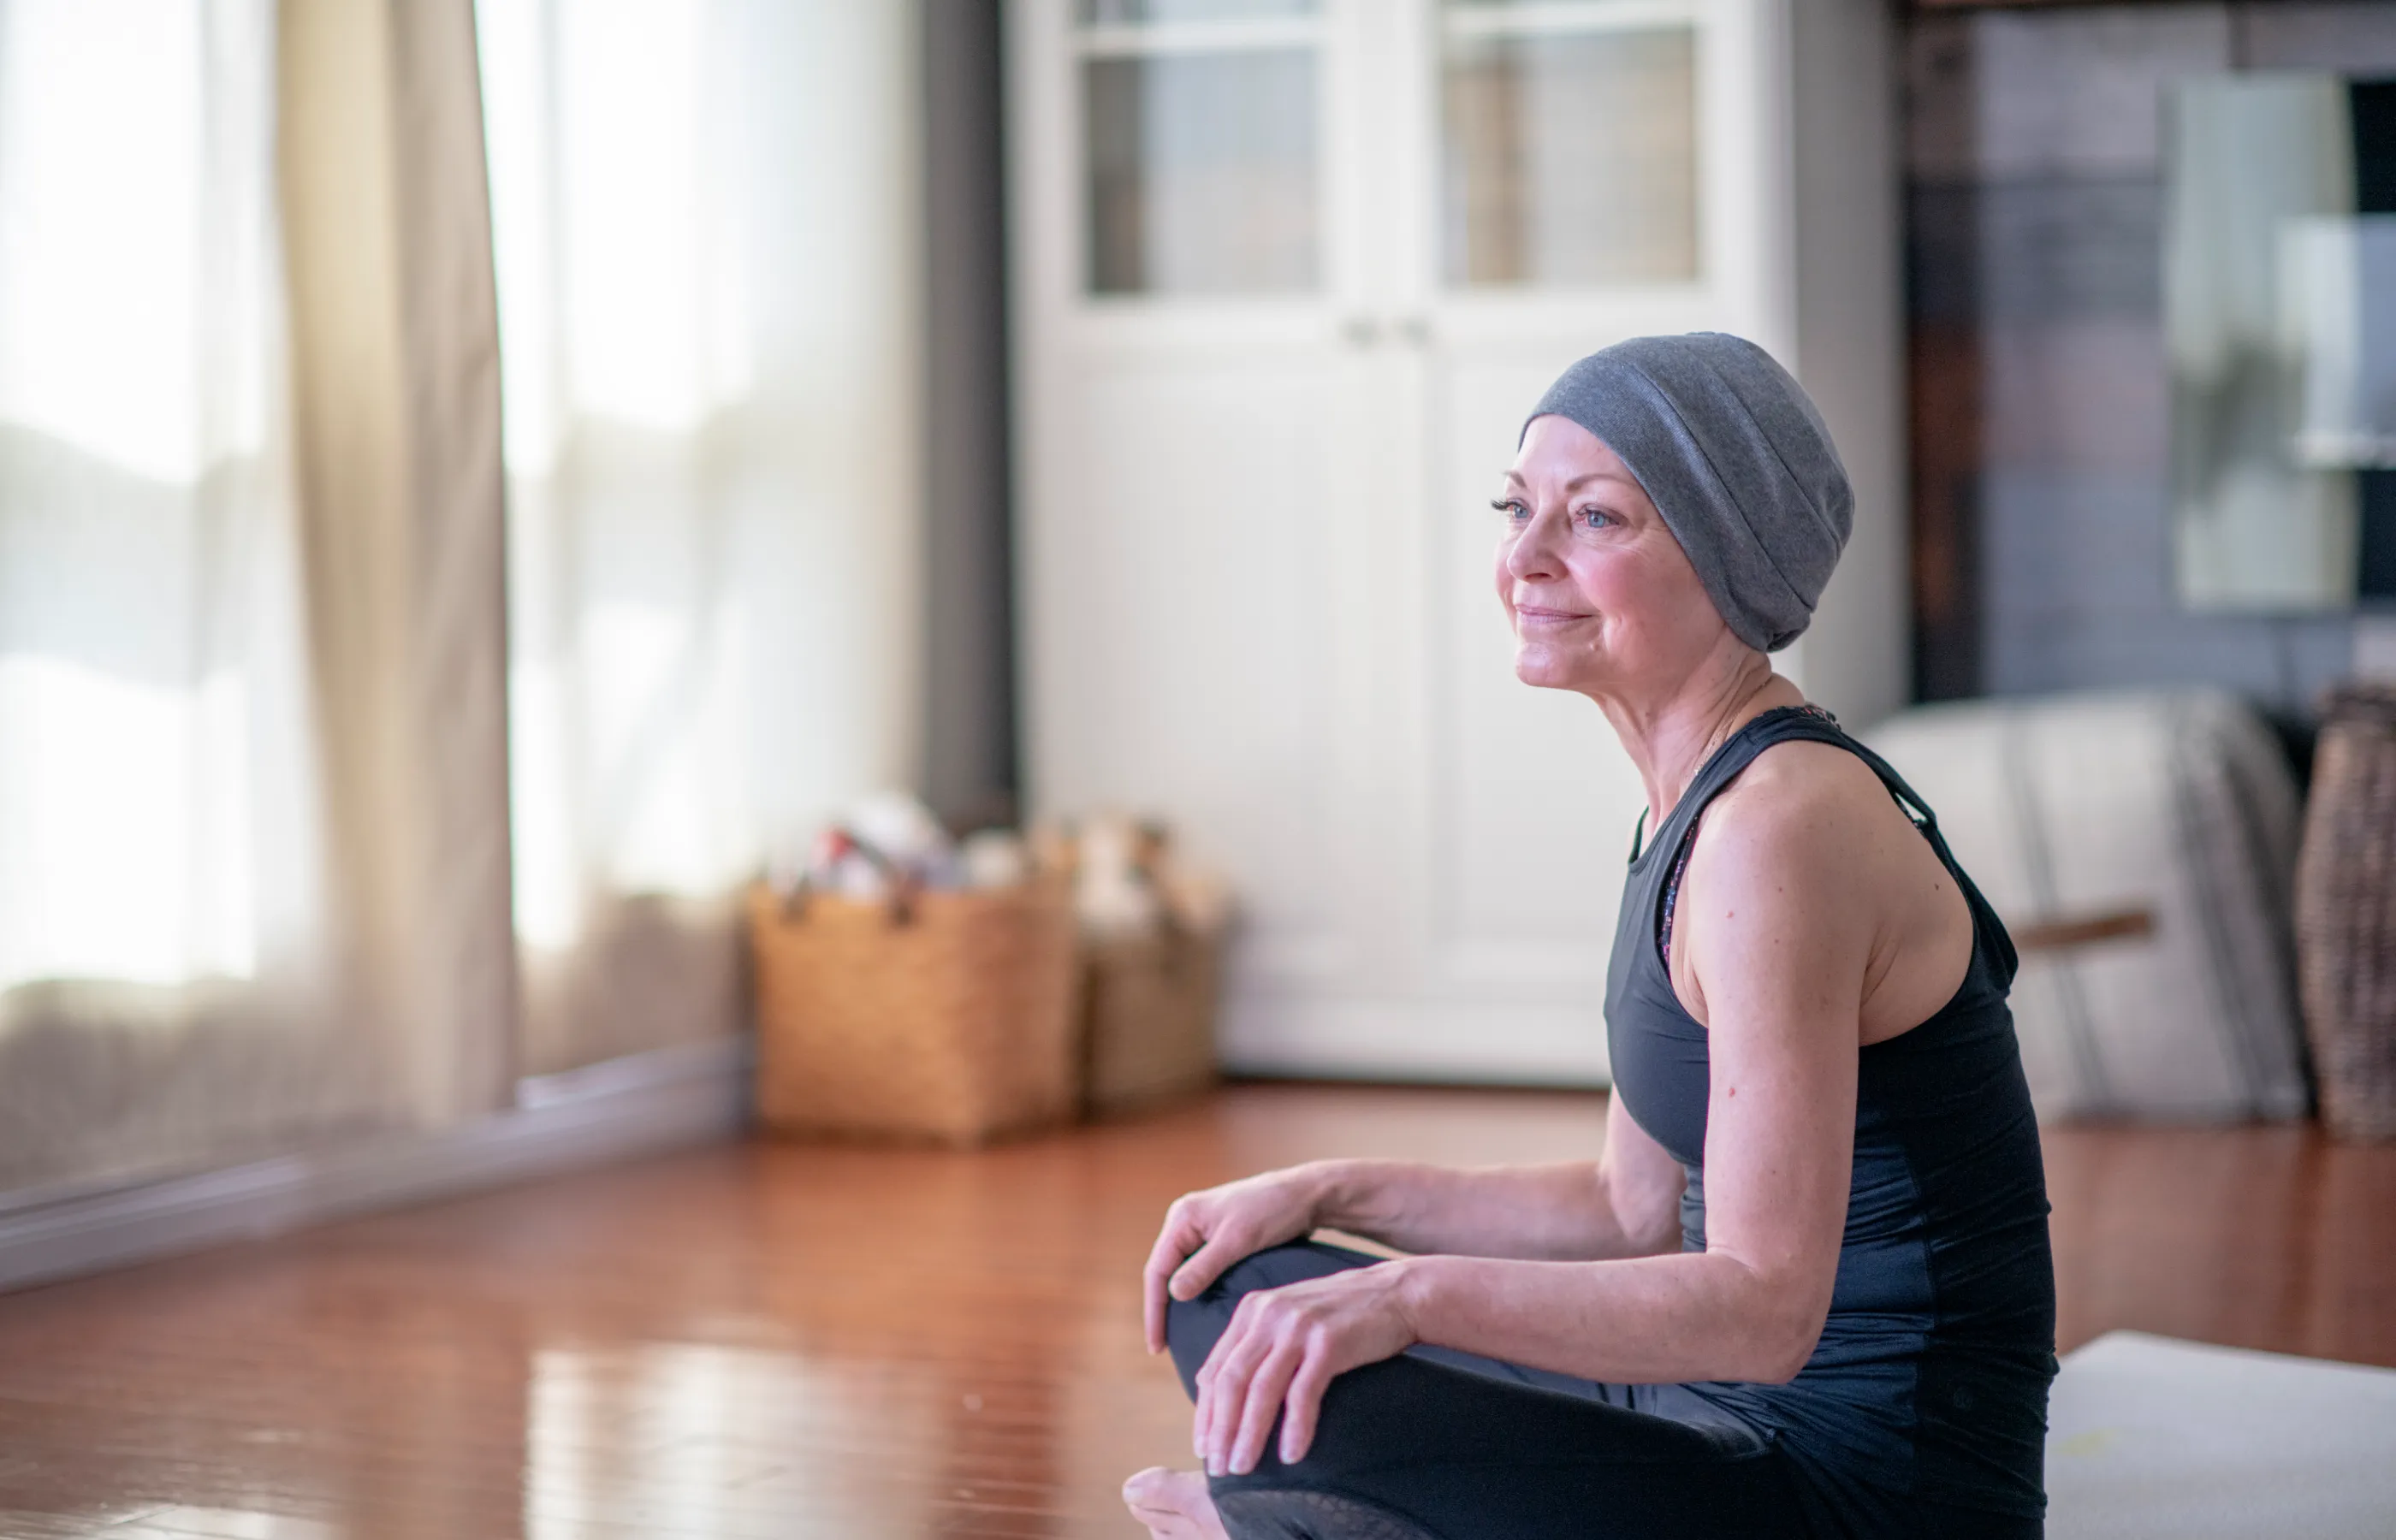 Cancer patient sitting on the floor in her home practicing yoga.